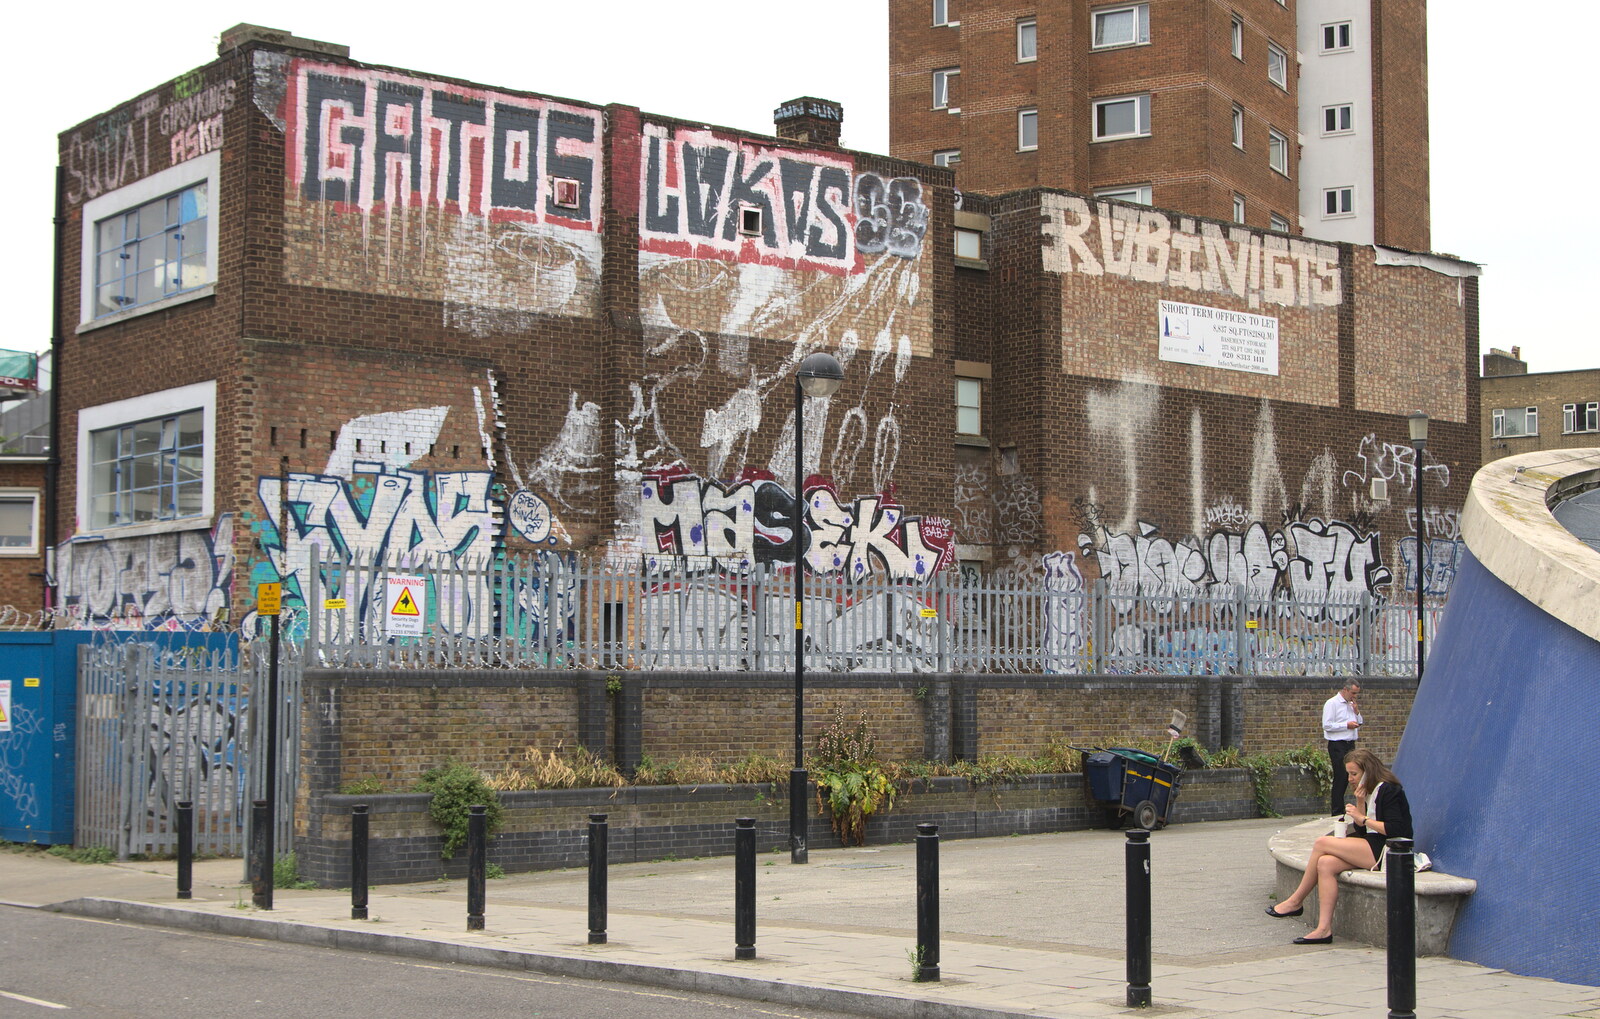 More graffiti near the back of Waterloo Station from Fred's Cast and a SwiftKey Lunch, Waterloo, London - 18th August 2015